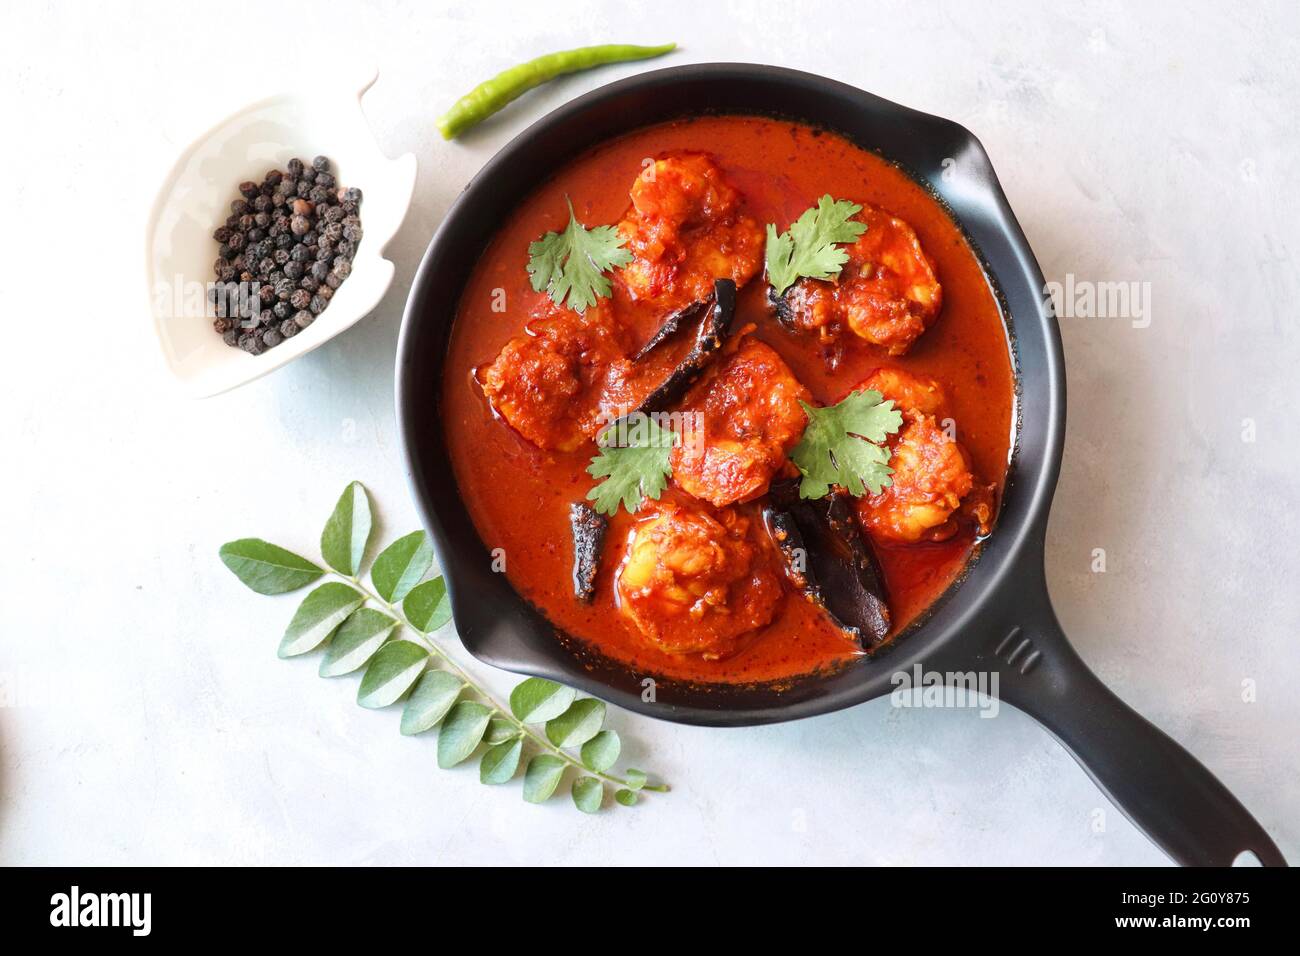 Goa Food-Indian Traditional Goan Prawns or Shrimp curry. Kolambiche kalwan/Tikhle. Hot and spicy homemade fish gravy cooked using coconut milk. Stock Photo